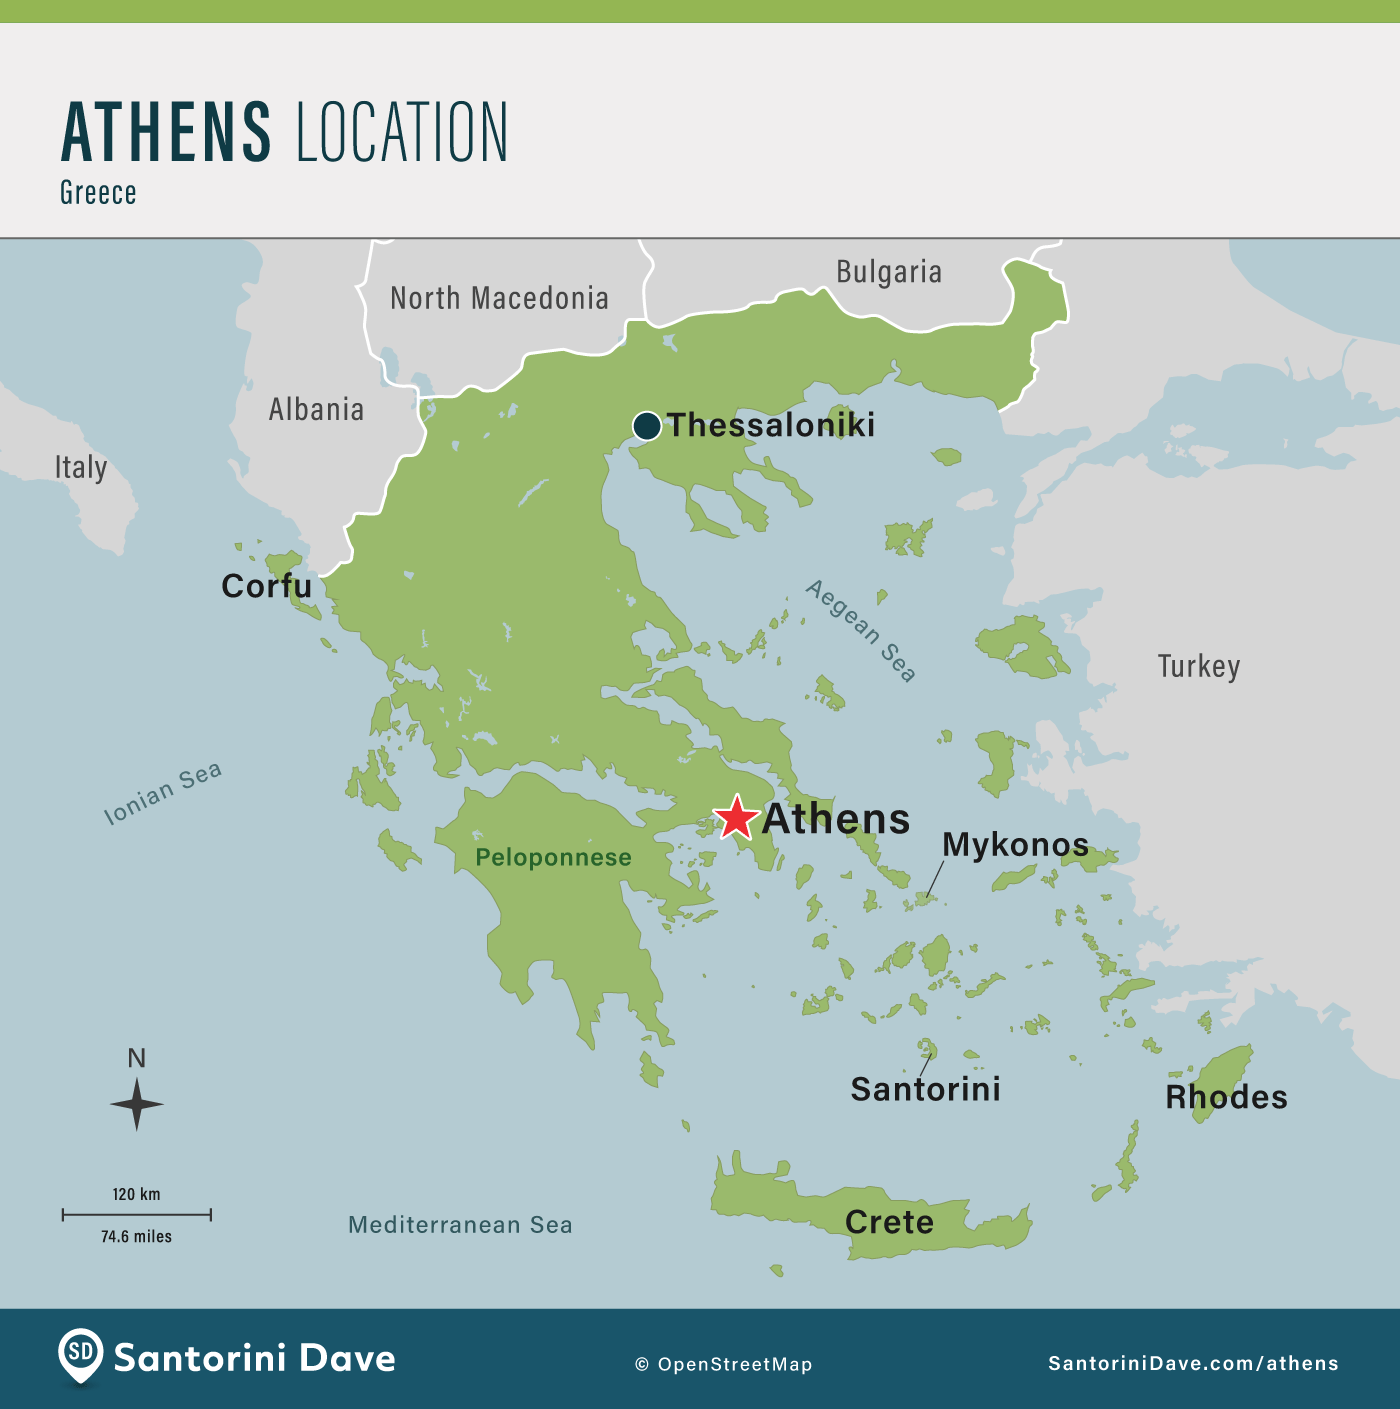 Map showing the location of Athens within Greece